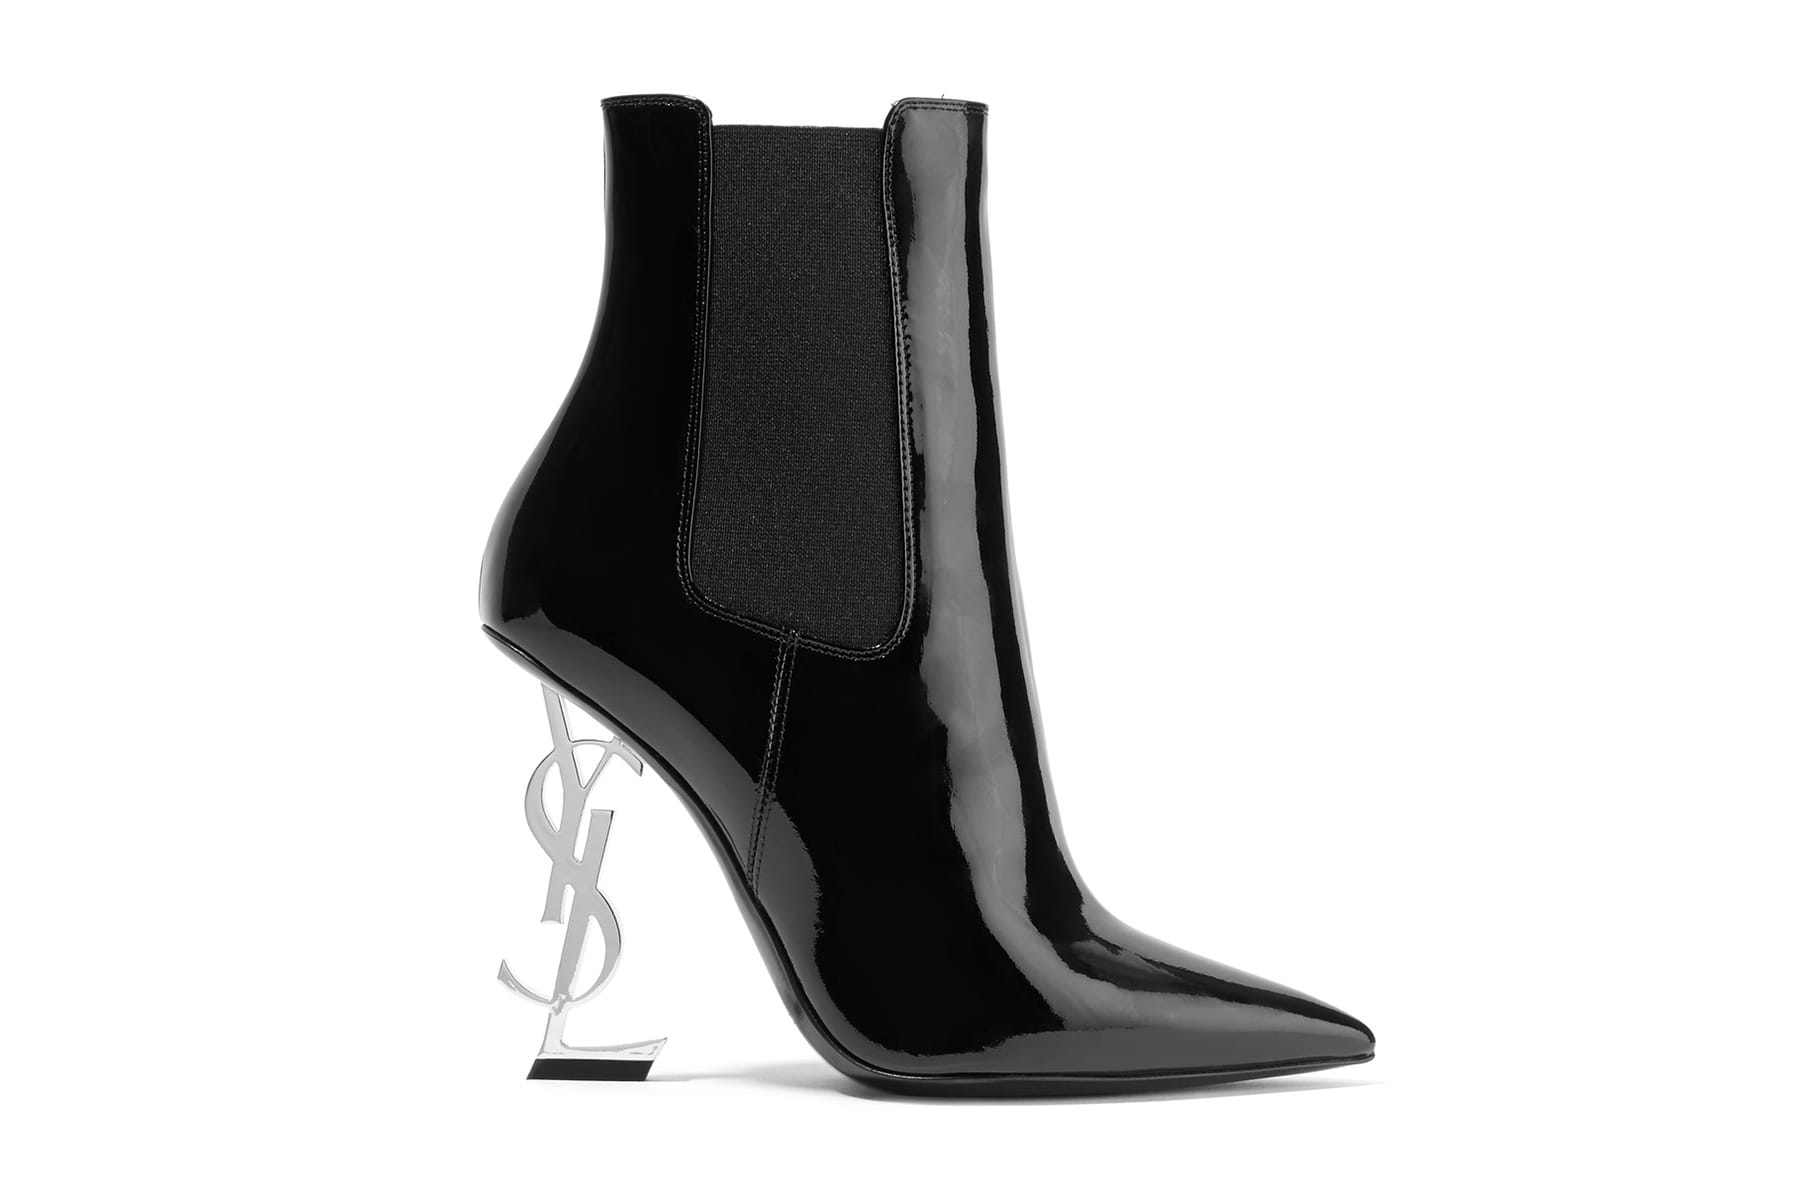 Ankle Boots Has a YSL Heel | HYPEBAE